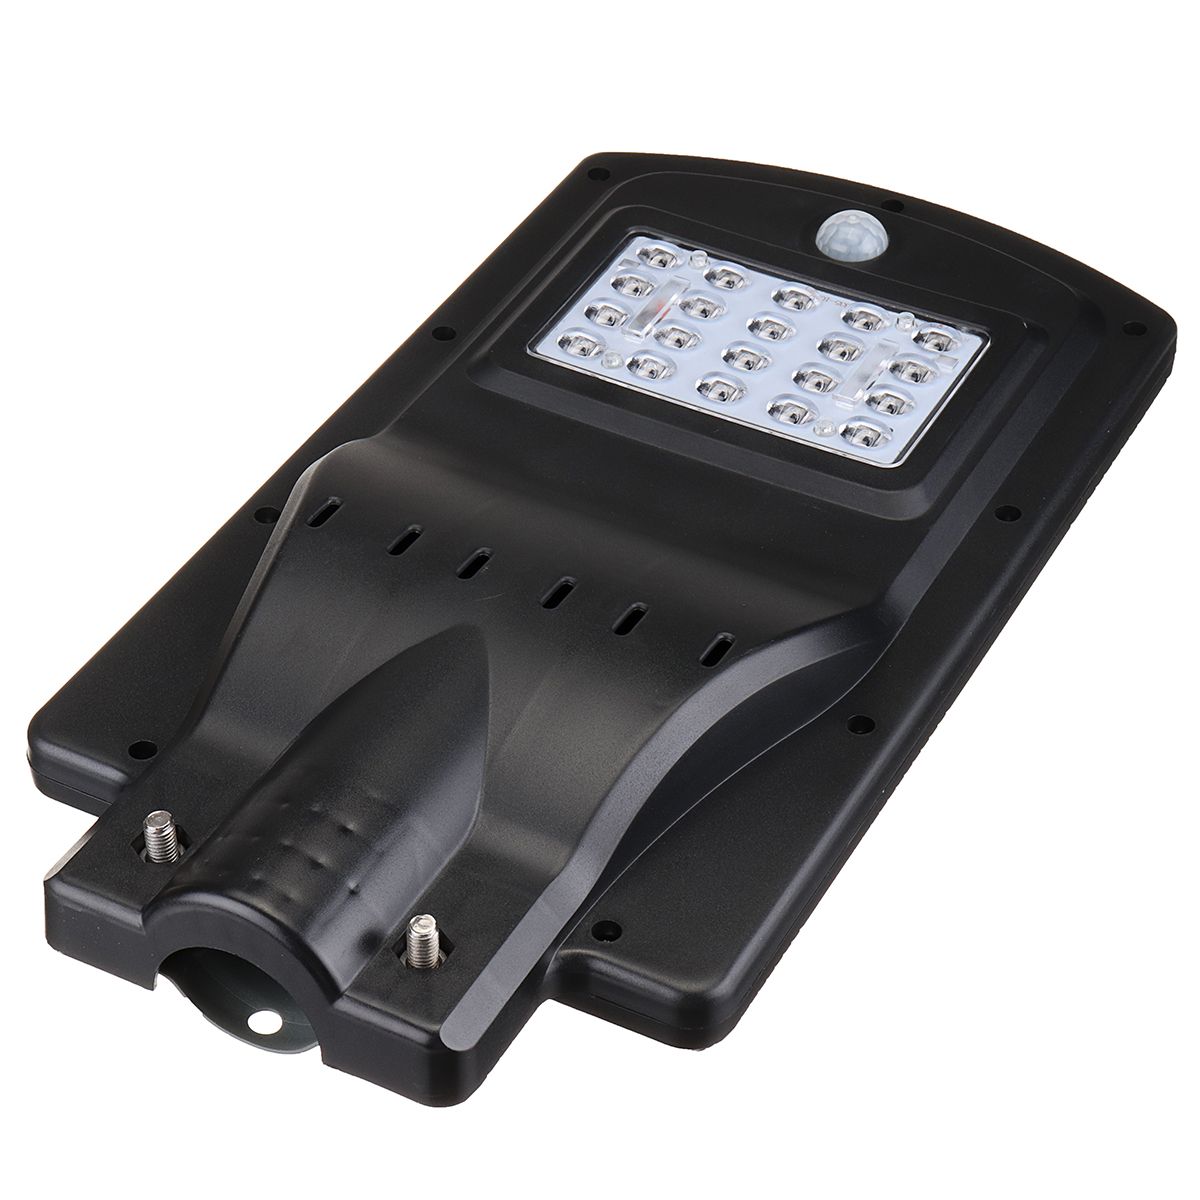 20W-40W-60W-Solar-Powered-LED-Wall-Street-Light-Outdoor-Lamp-With-Remote-Control-1403450